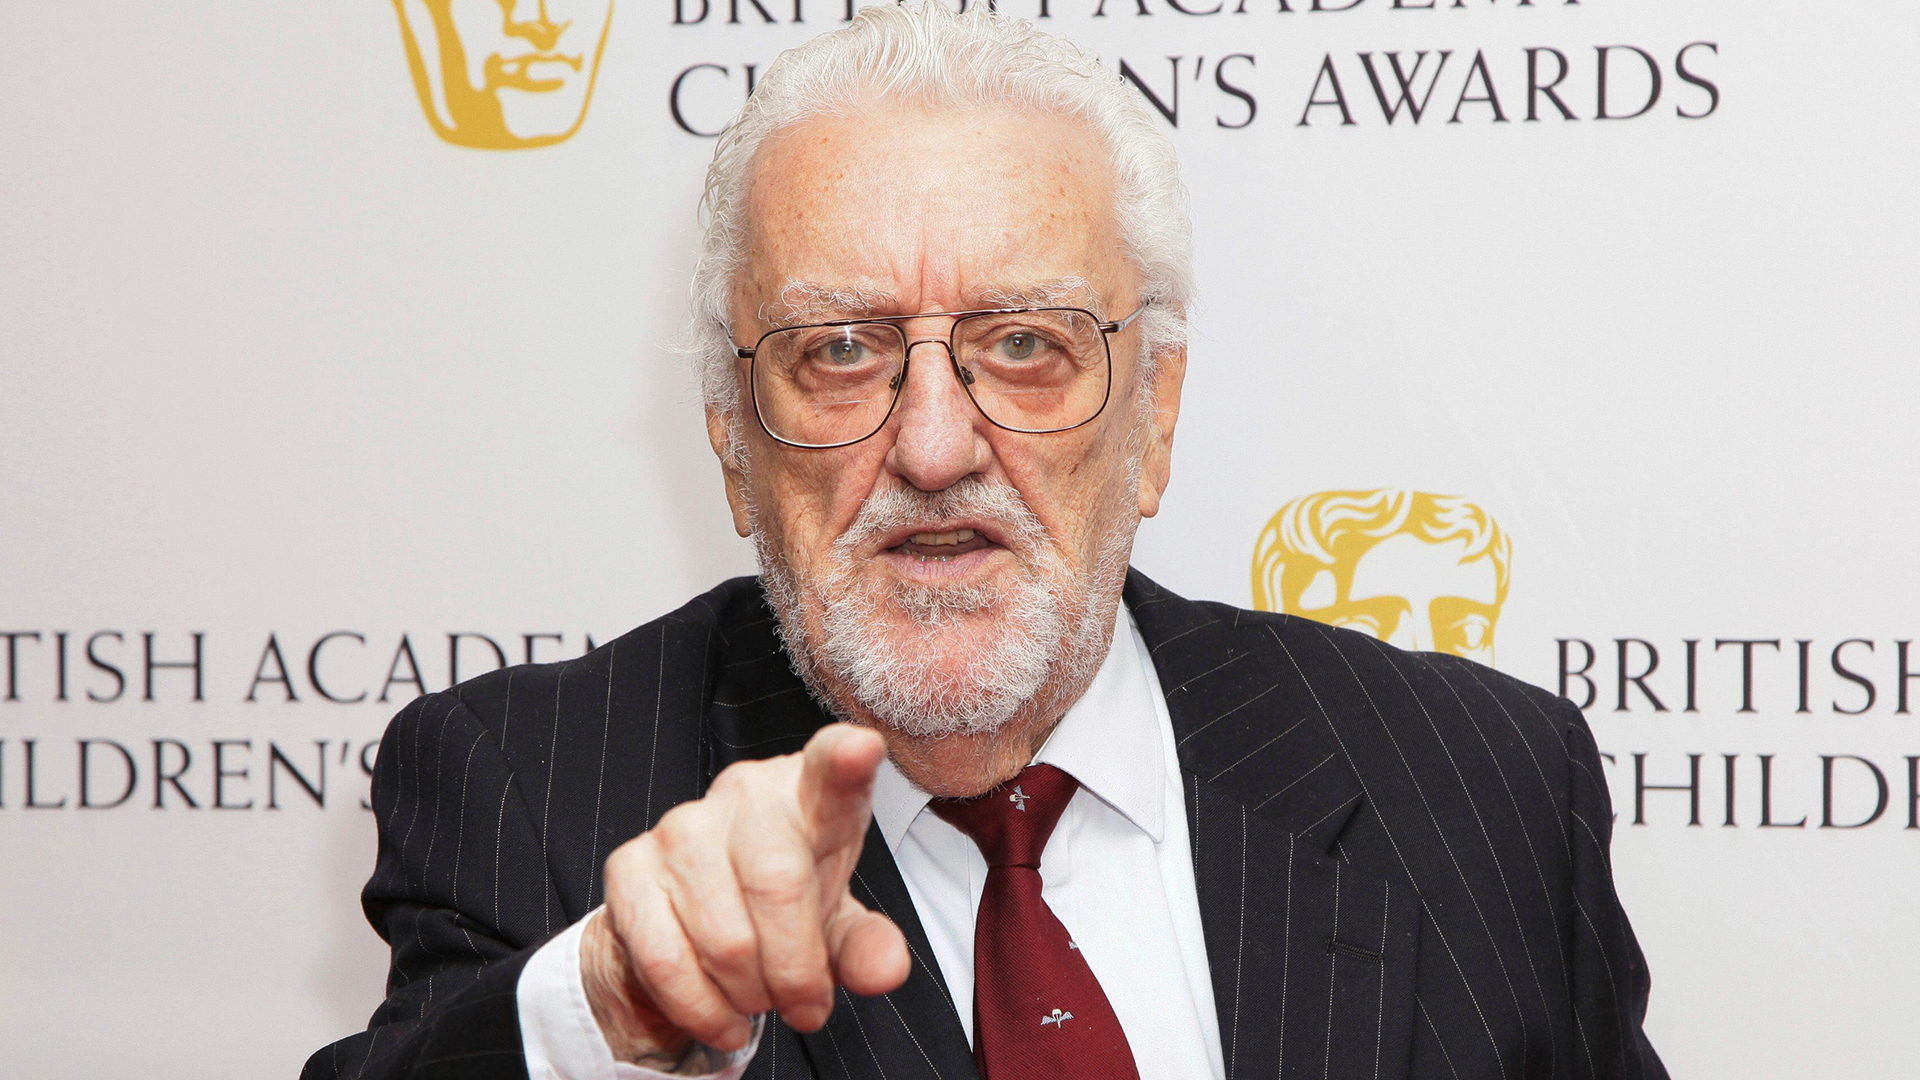 Bernard Cribbins poses for photographers as he arrives for the British Academy Children's Awards in 2014